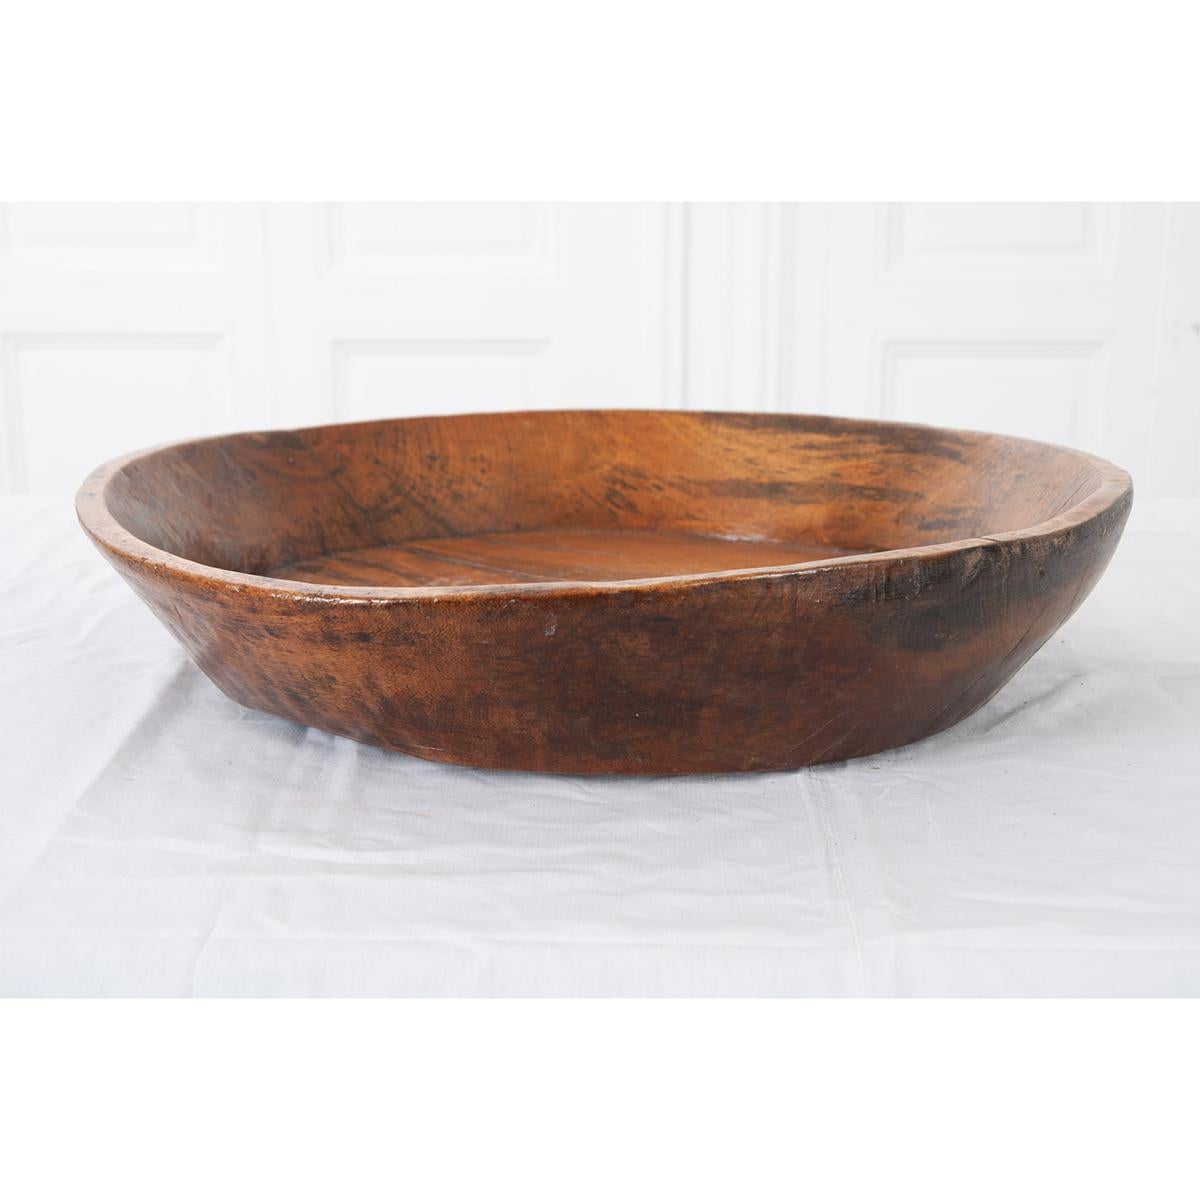 This is an English 19th century hand carved wood bowl - well used and beautiful. It has a metal patch on the side to strenghten it. The sides are very thick and the inside bottom has a faded design on it. The bowl would look great on any table or